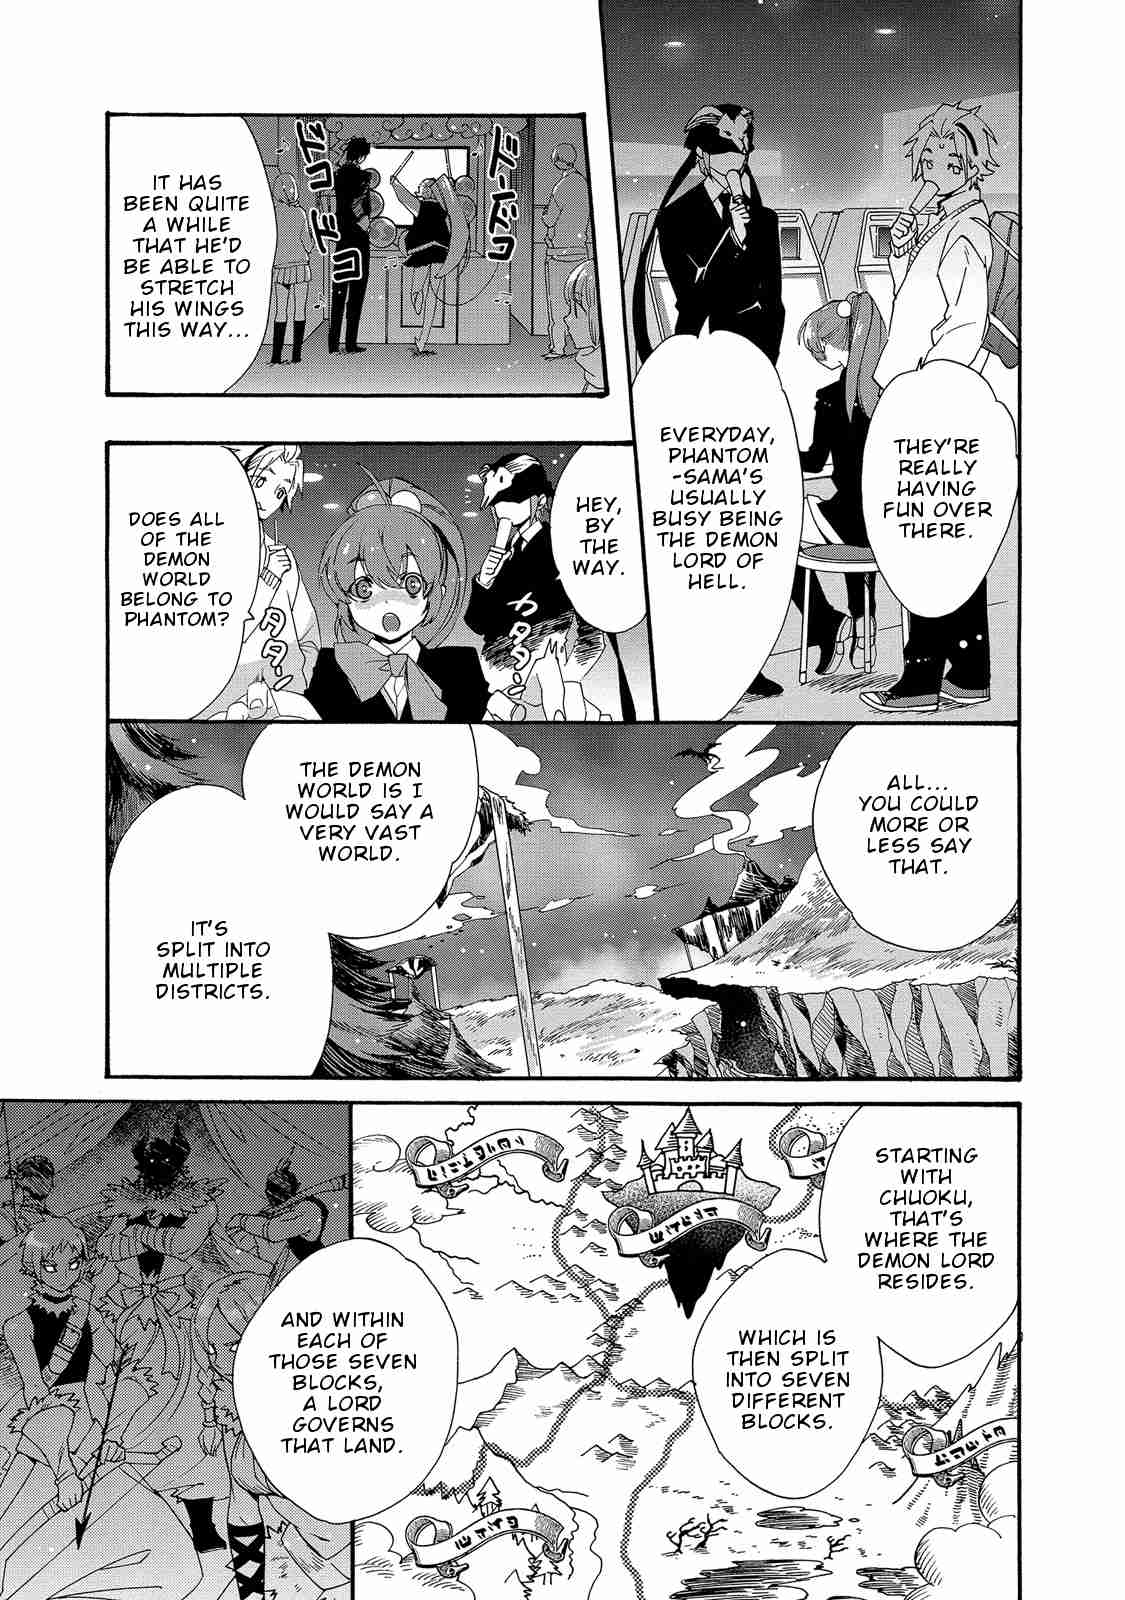 Magical Change Vol. 2 Ch. 12 The Lustful Ruler Asumode Appears